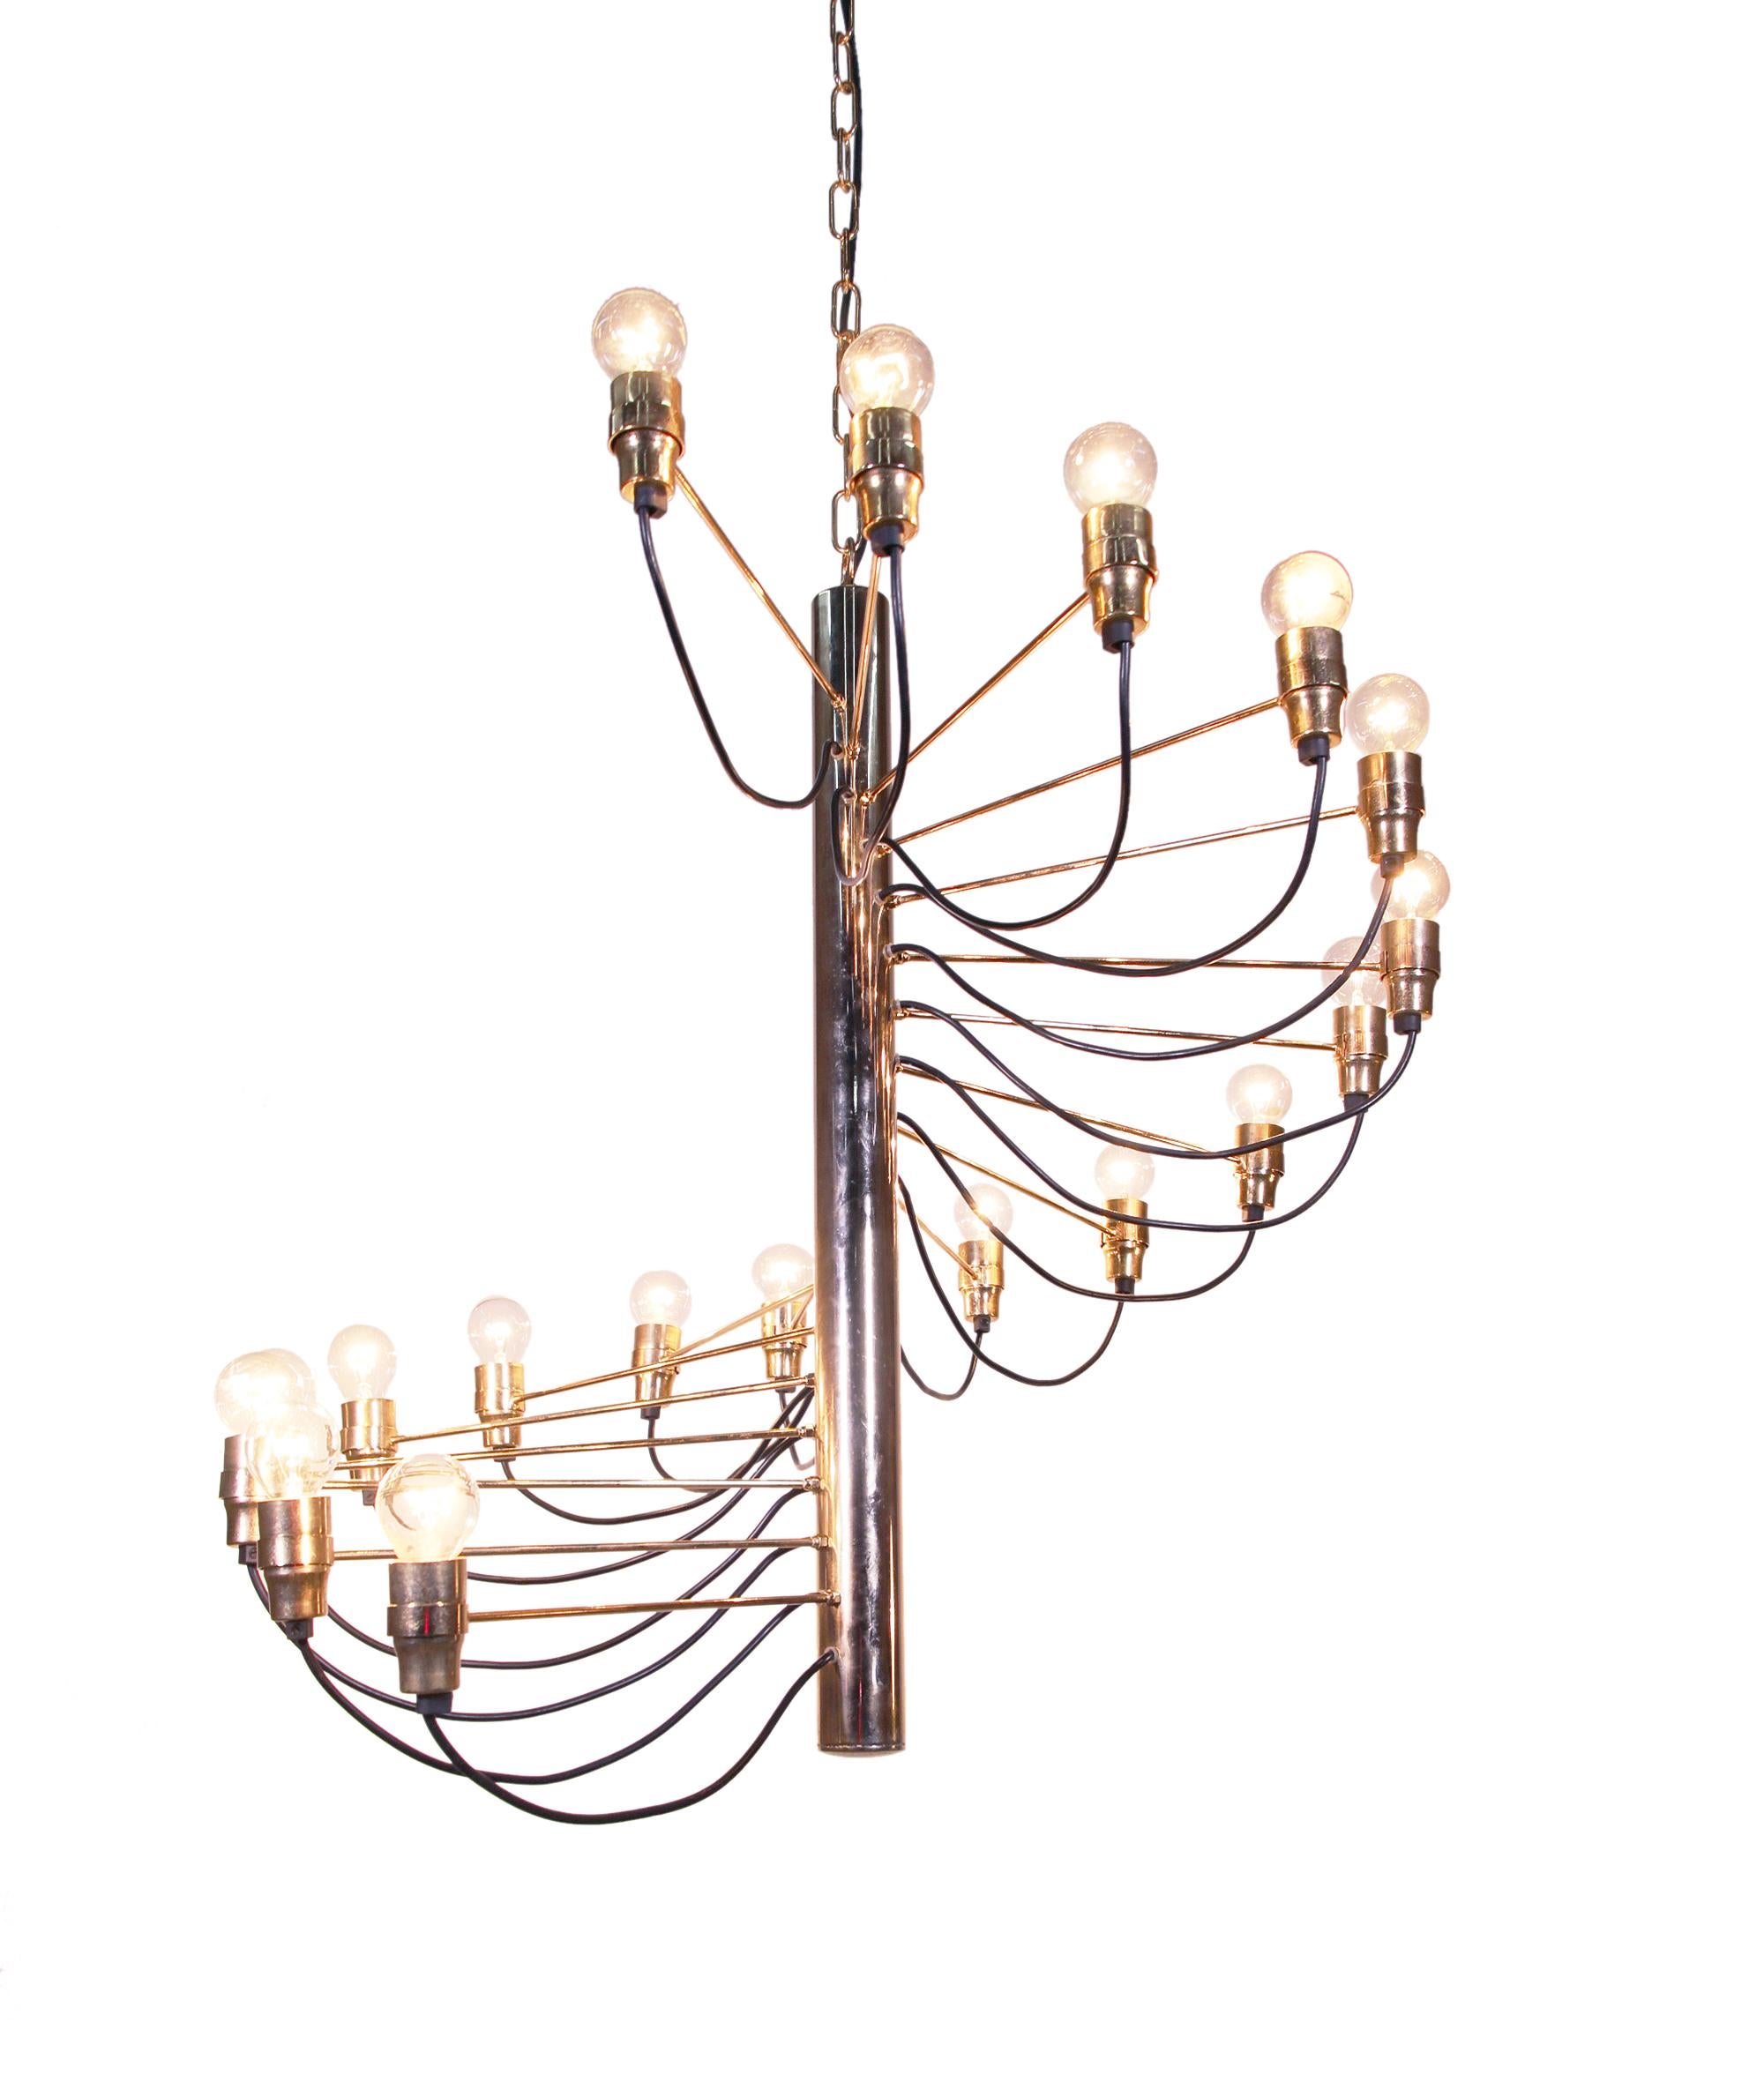 Elegant chandelier by Gino Sarfatti with 18 radiating brass arms and sockets, an early production from the 1950s. 

Measures: diameter 27.5“ in. (70 cm), height 27.5“ in. (70 cm), incl. suspension 59“ in. (150 cm). 
Lighting: takes 18 small Edison